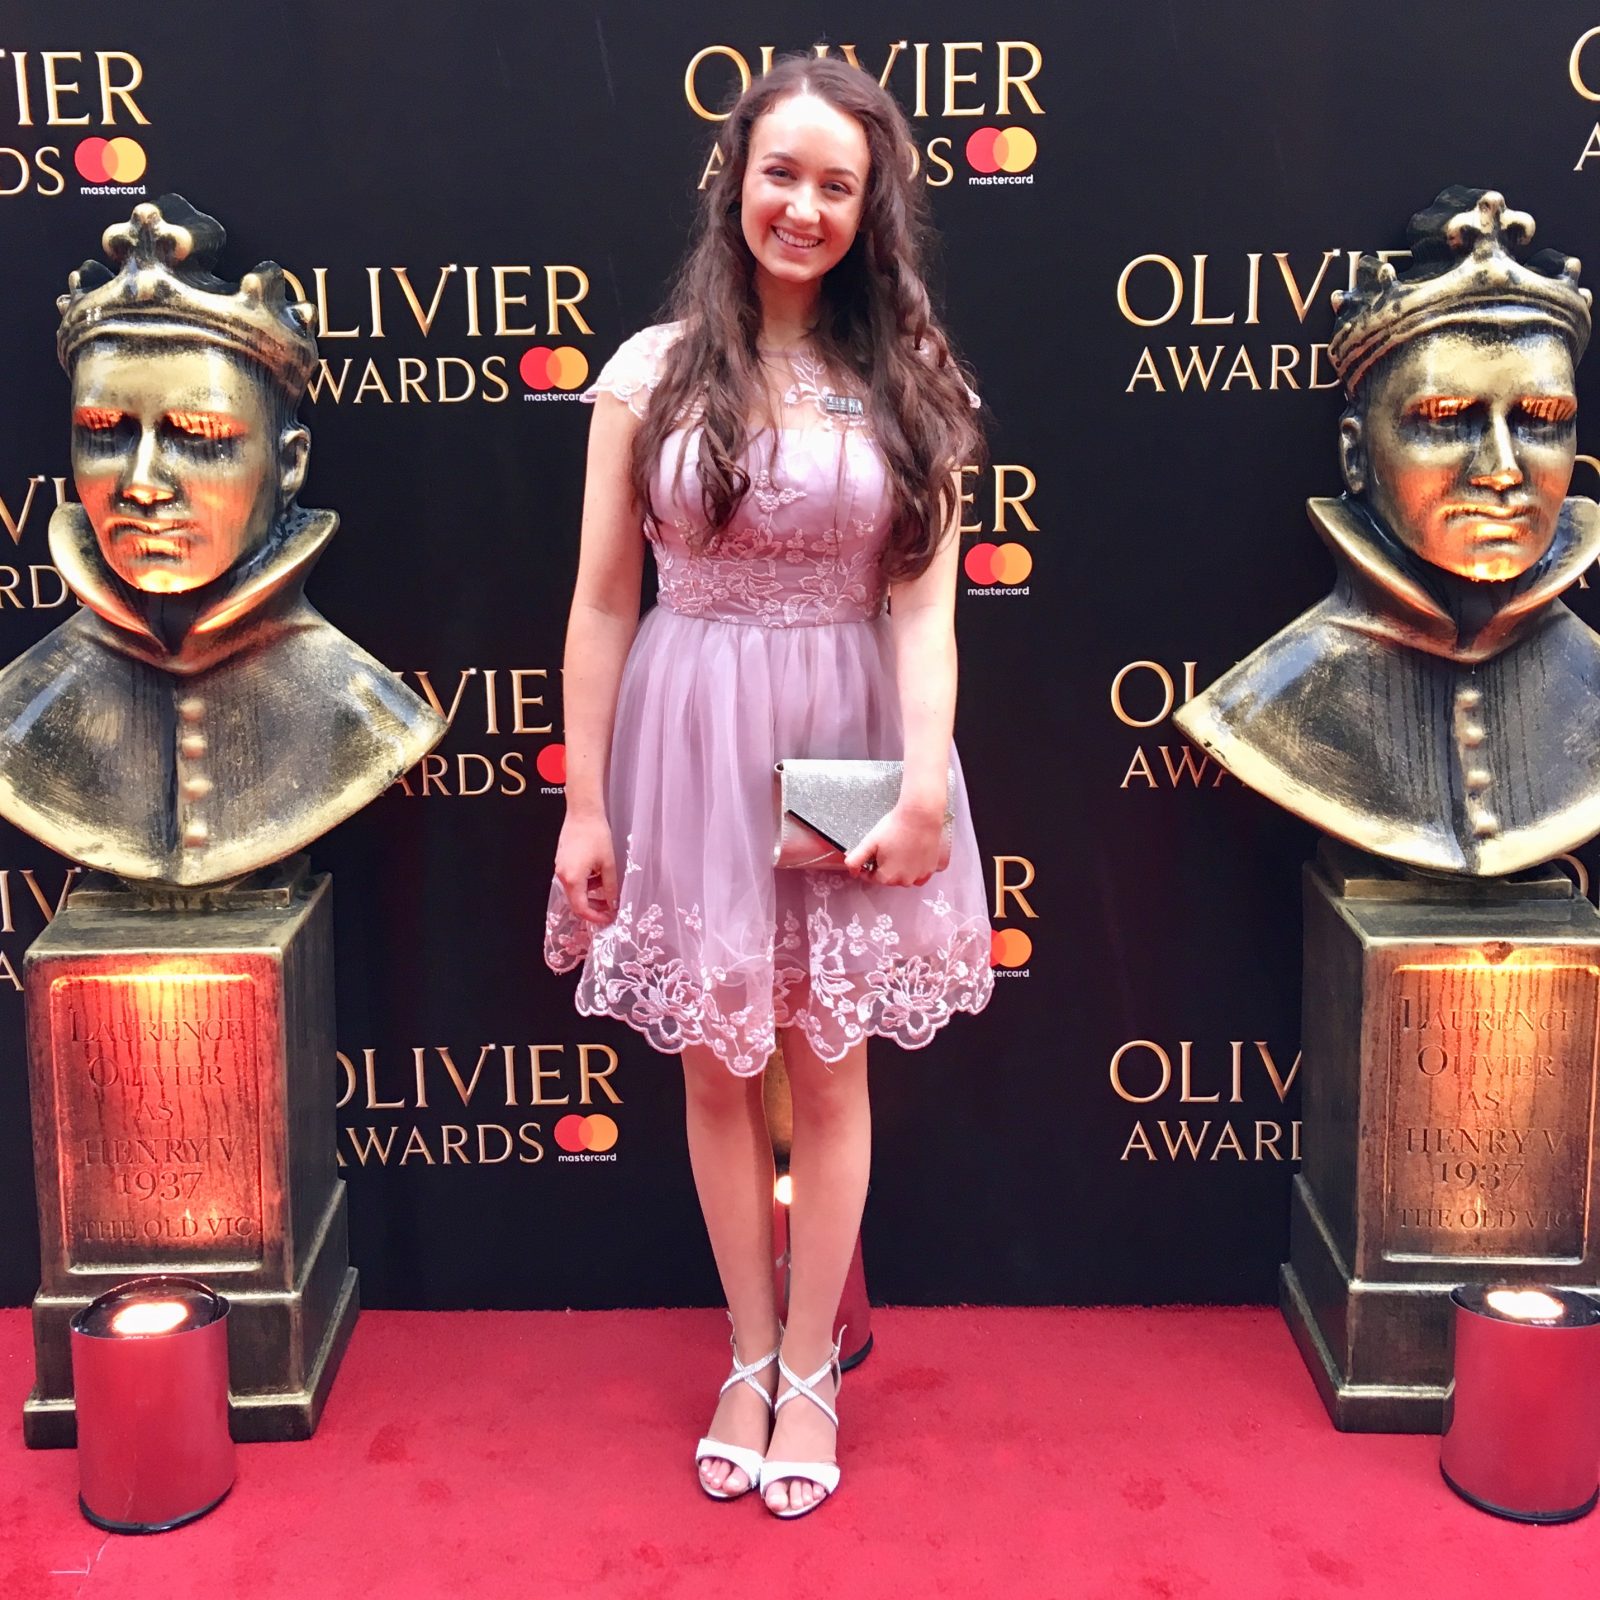 full length image of pippa in pink formal dress stood on red carpet in front of olivier awards photo board